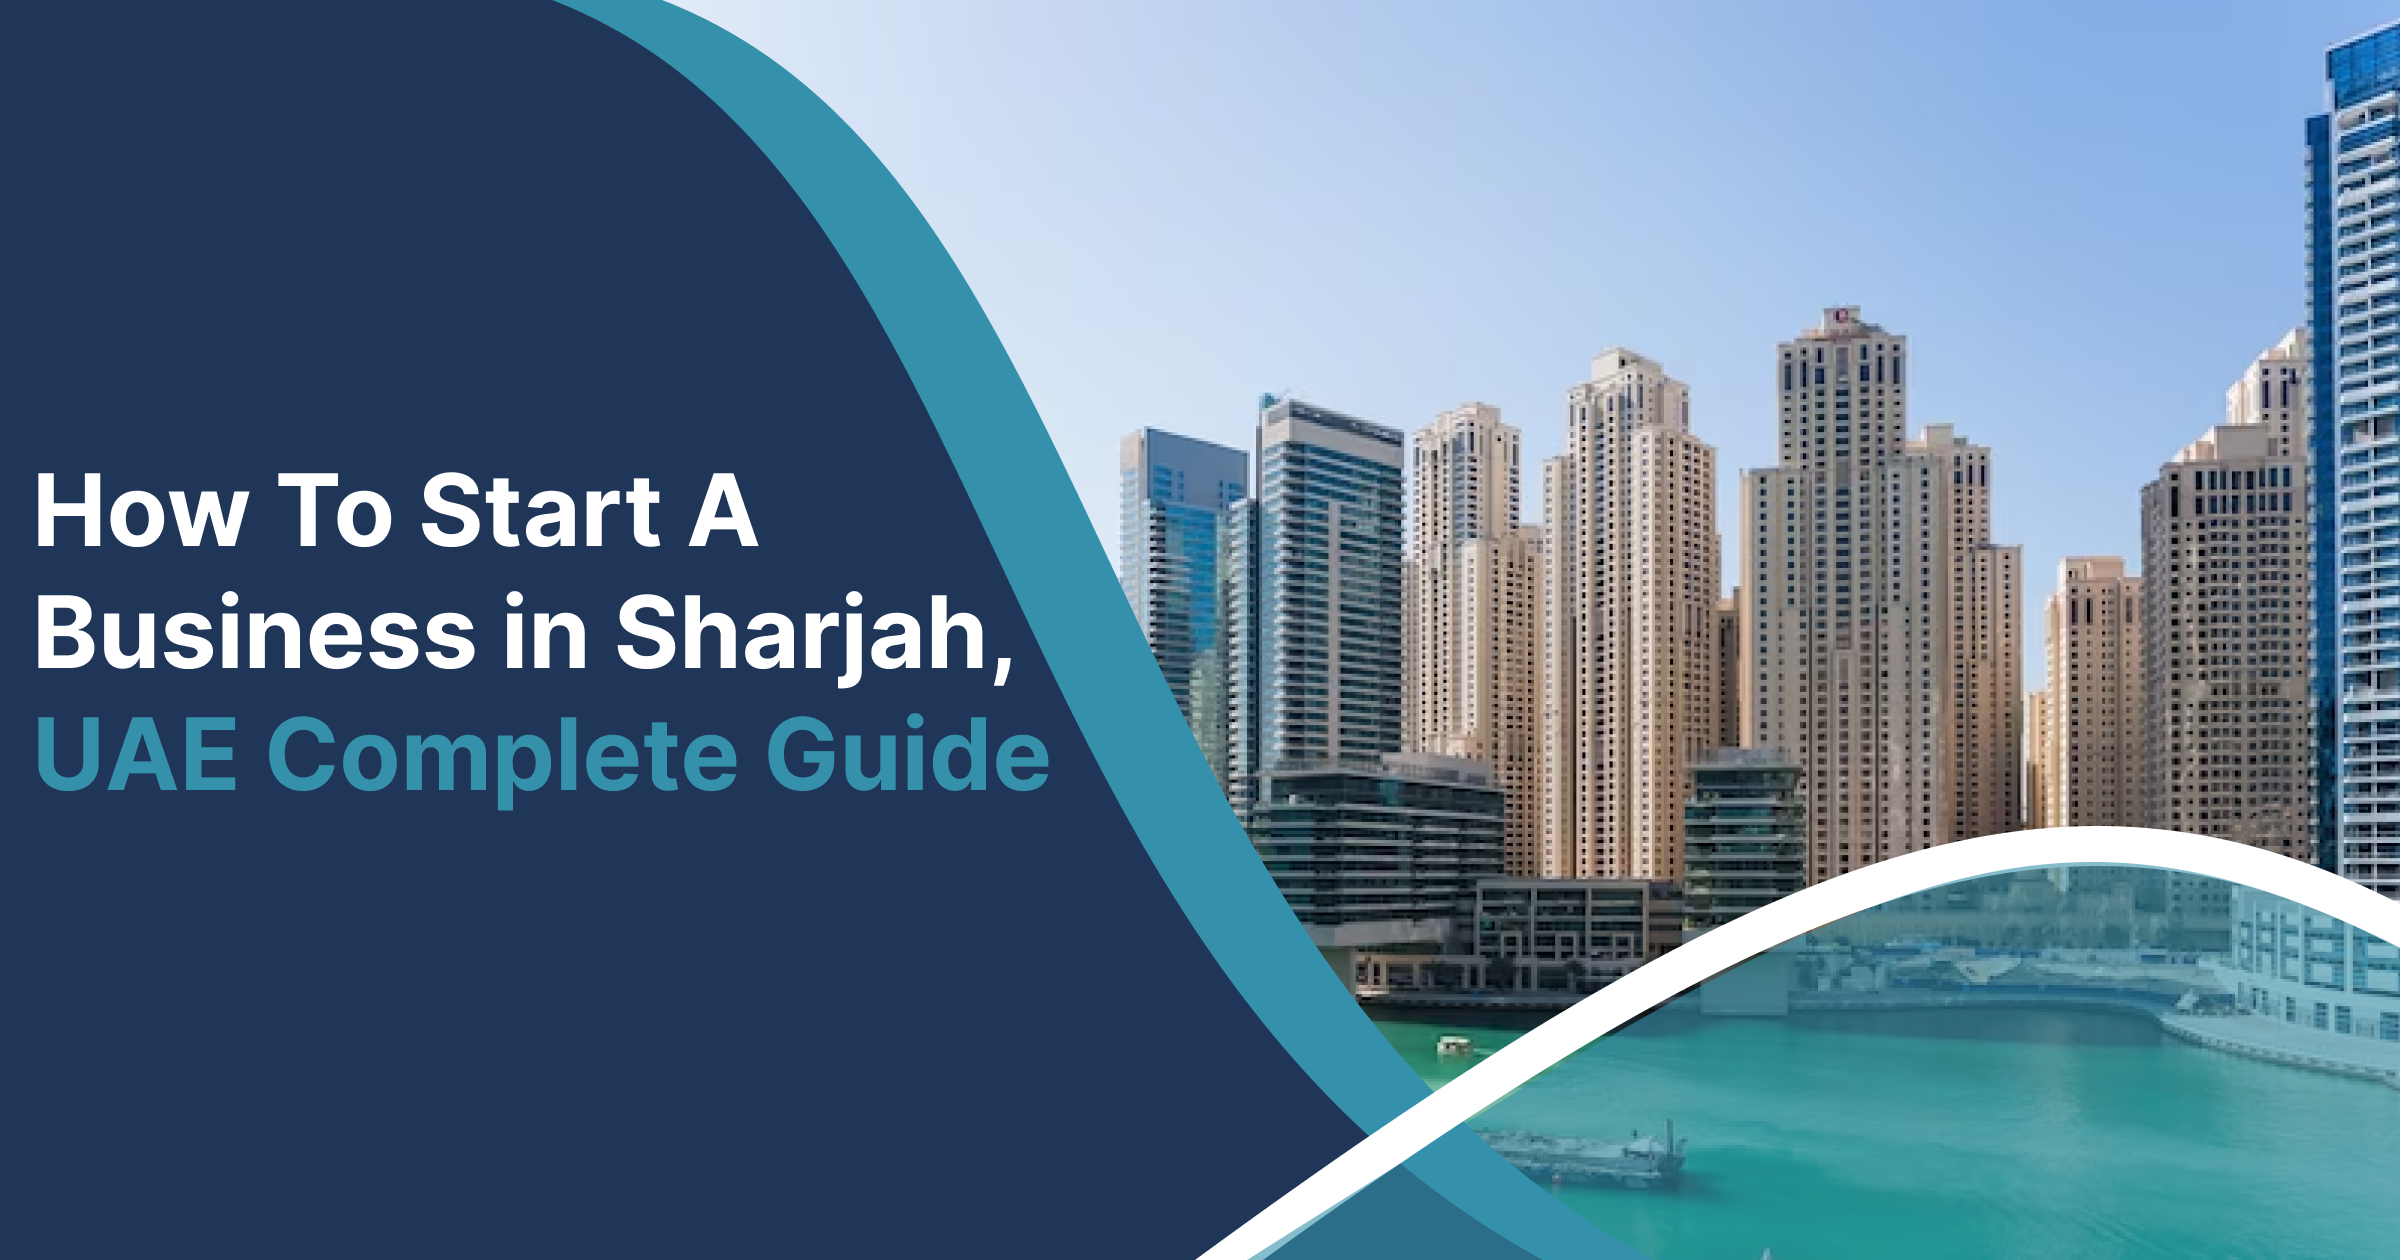 How To Start A Business In Sharjah, UAE Complete Guide